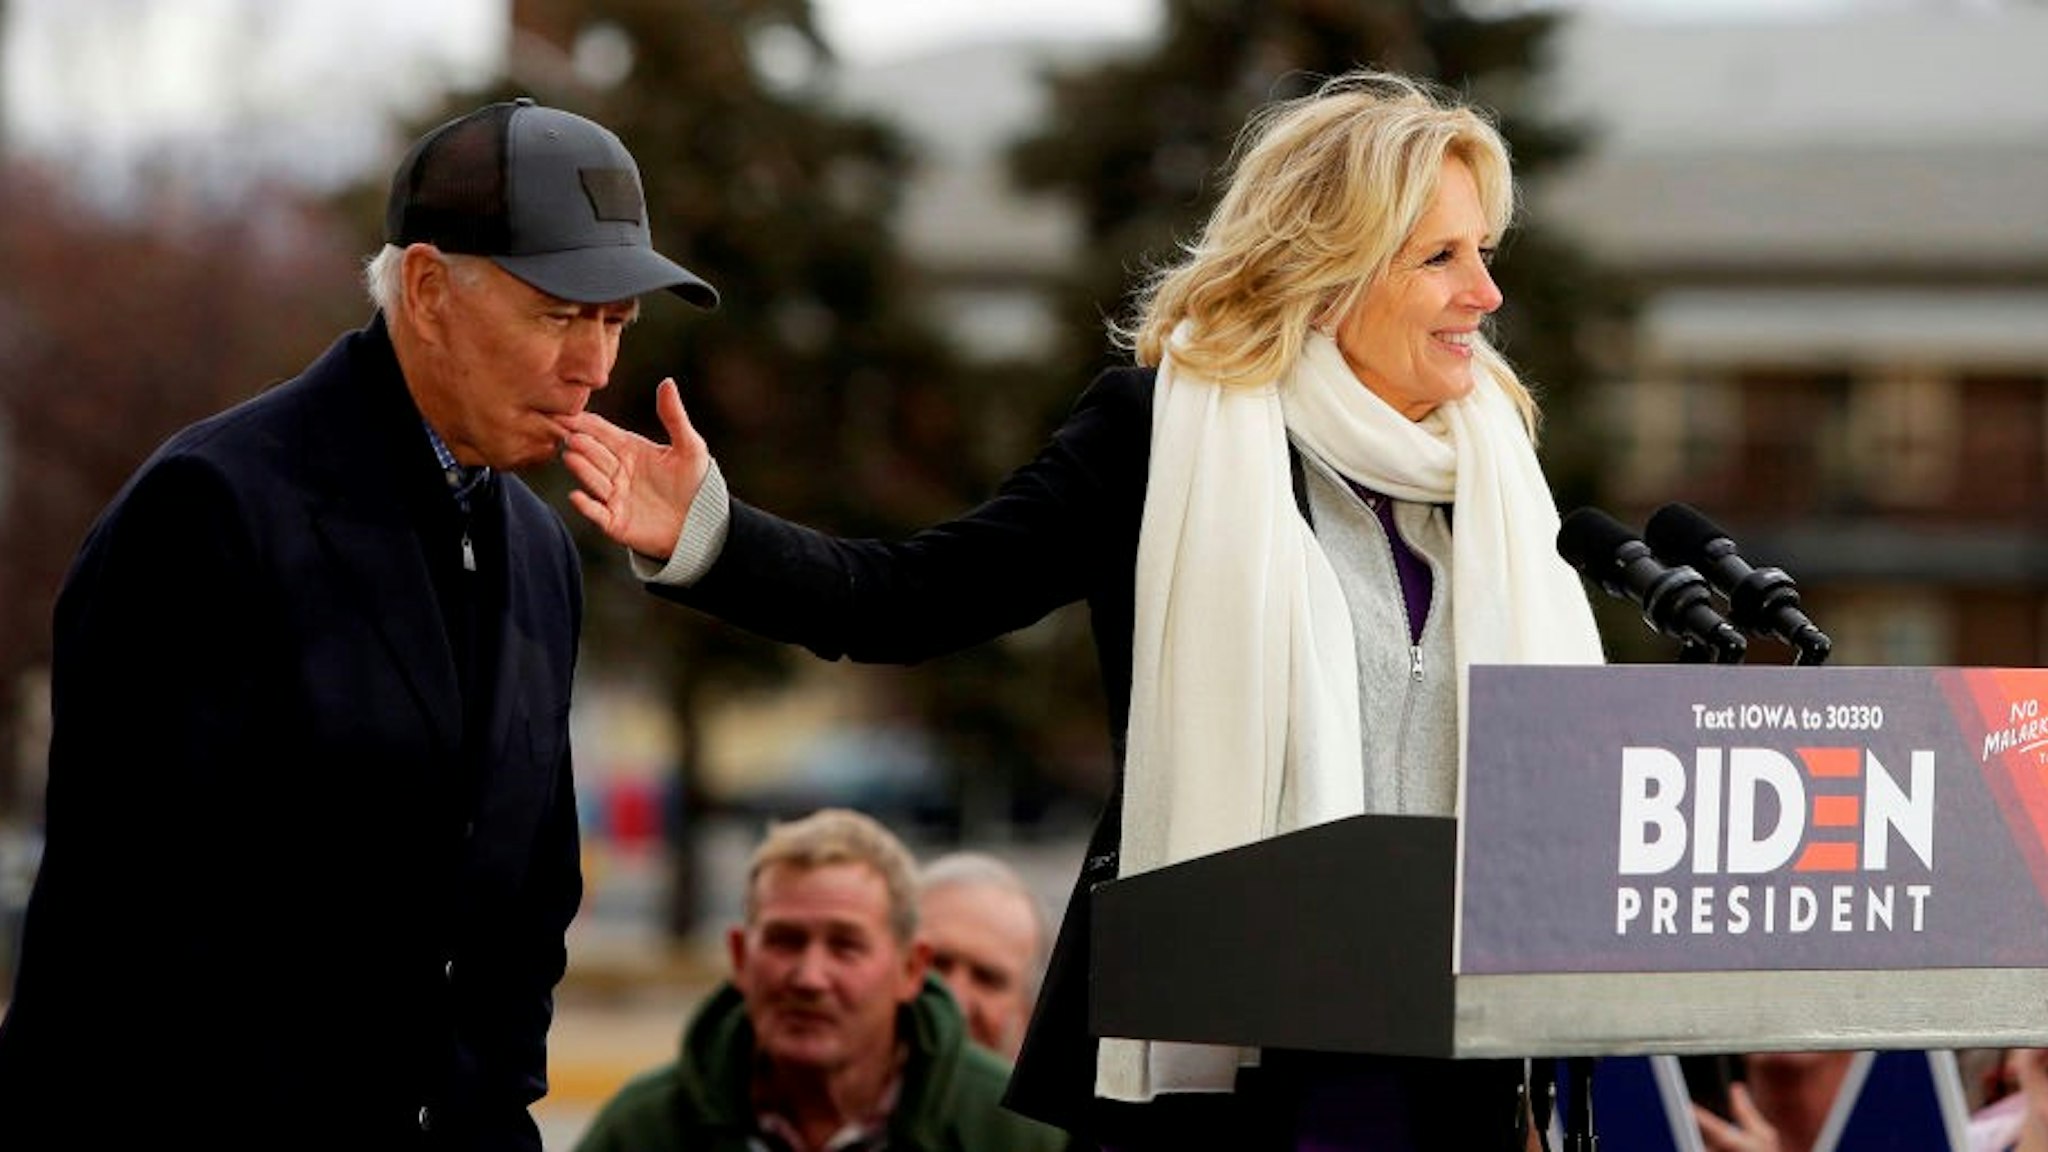 Democratic presidential candidate, former Vice President Joe Biden bites the finger of his wife Jill Biden as she introduces him during a campaign event on November 30, 2019 in Council Bluffs, Iowa. Biden, who begins his eight-day bus tour across Iowa on Saturday, once lead the state in the polls but now trails presidential candidates Pete Buttigieg and Elizabeth Warren with just under 3 months until the 2020 Iowa Democratic caucuses.